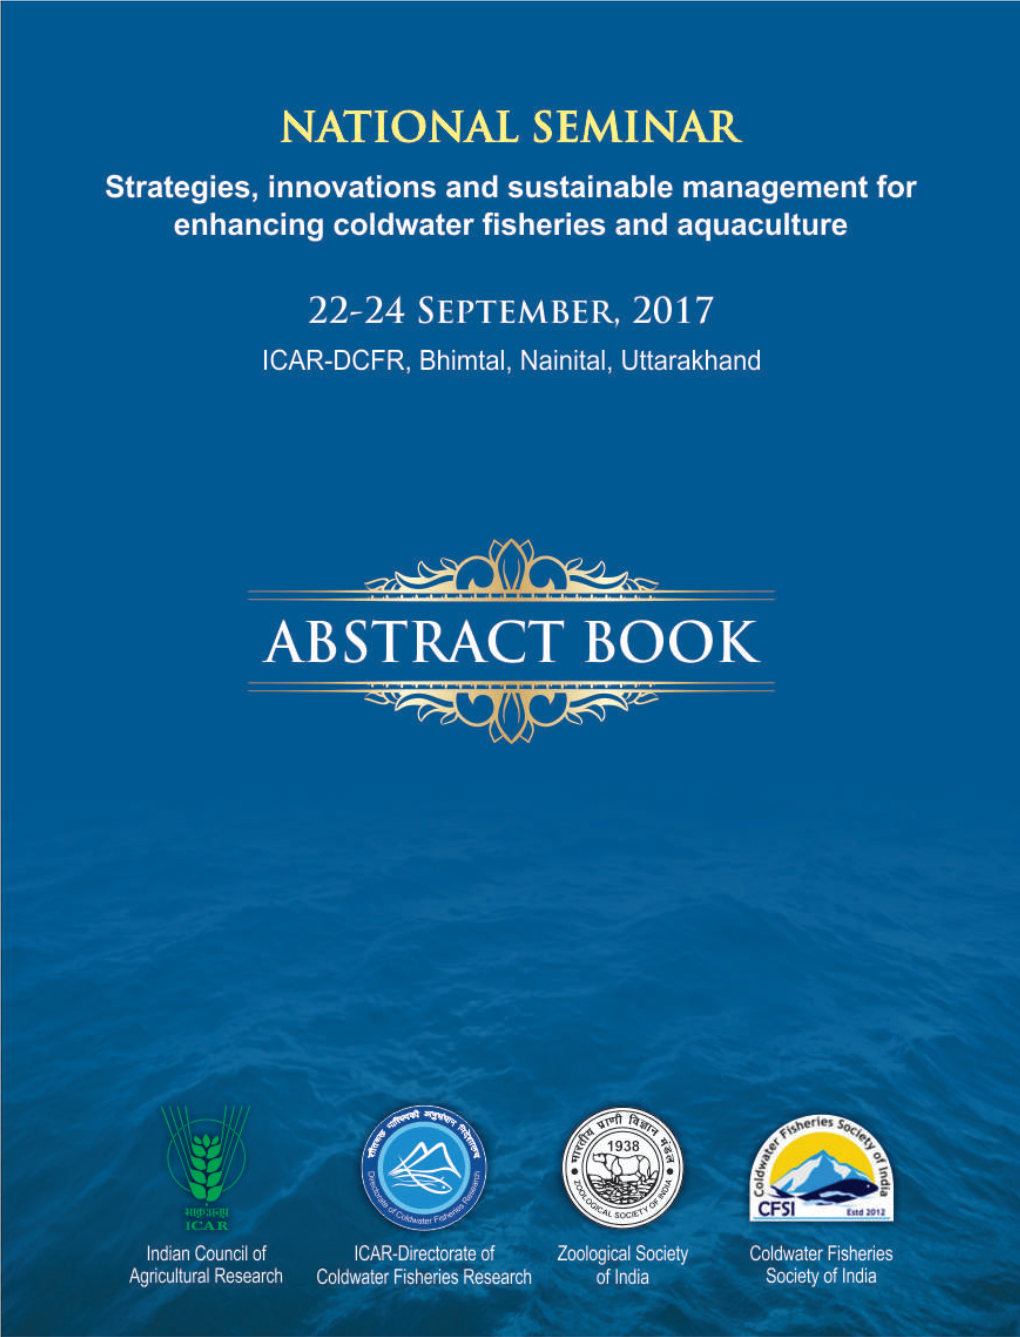 ABSTRACT BOOK National Seminar on “Strategies, Innovations and Sustainable Management for Enhancing Coldwater Fisheries and Aquaculture”